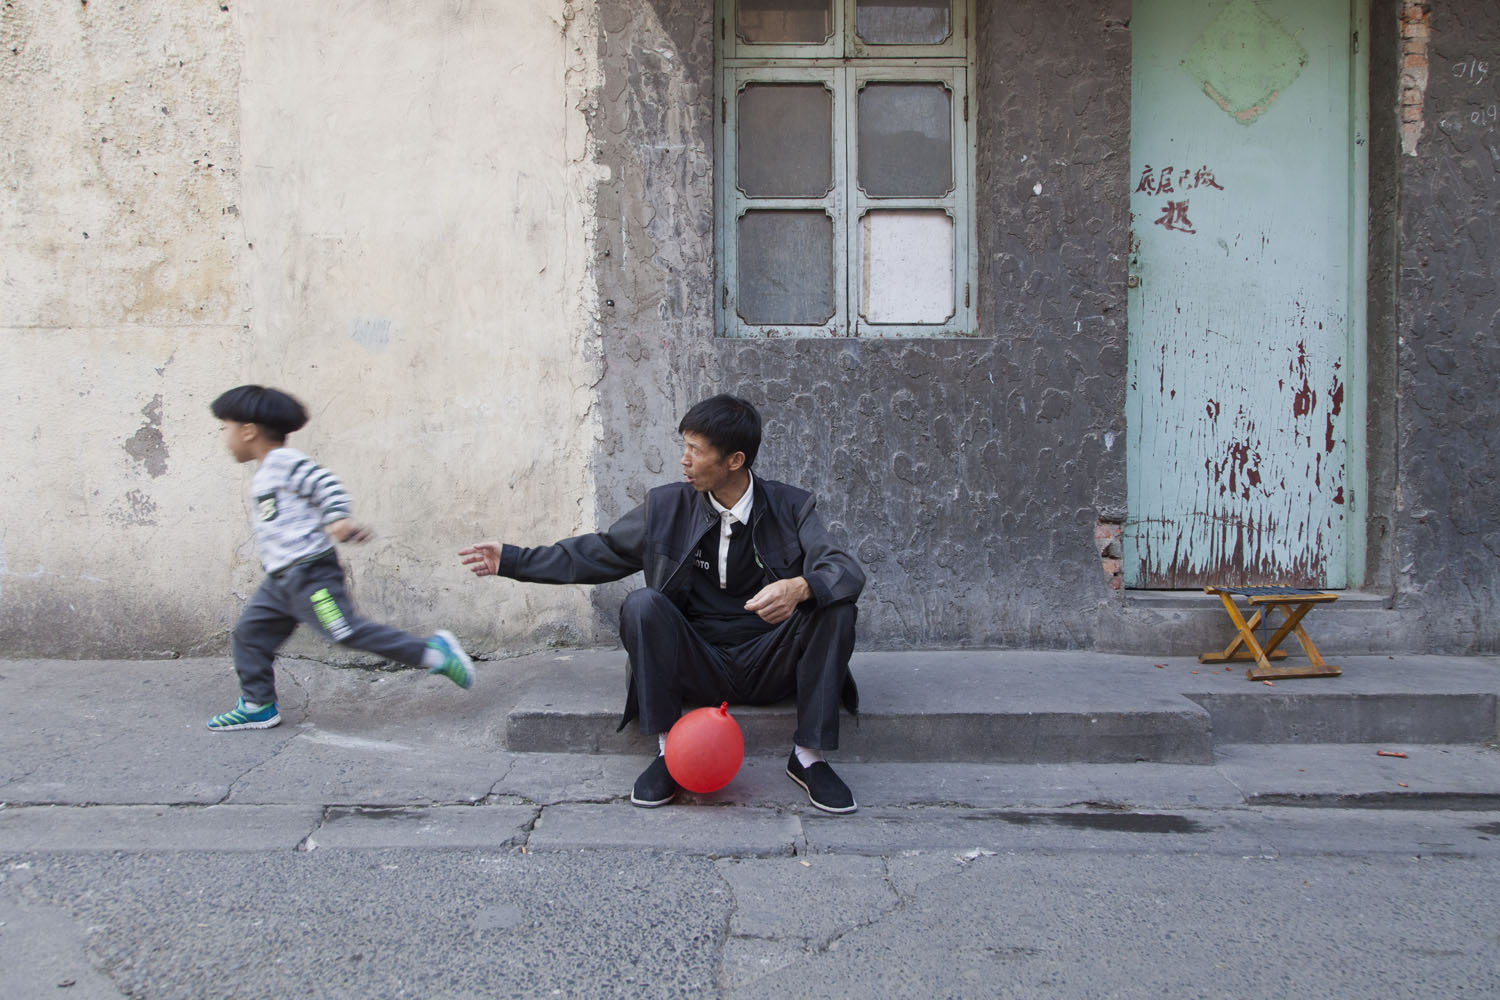   An elderly man and his grandson play in one of the main alleys. Guangfu Road. Shanghai, China. 2015.